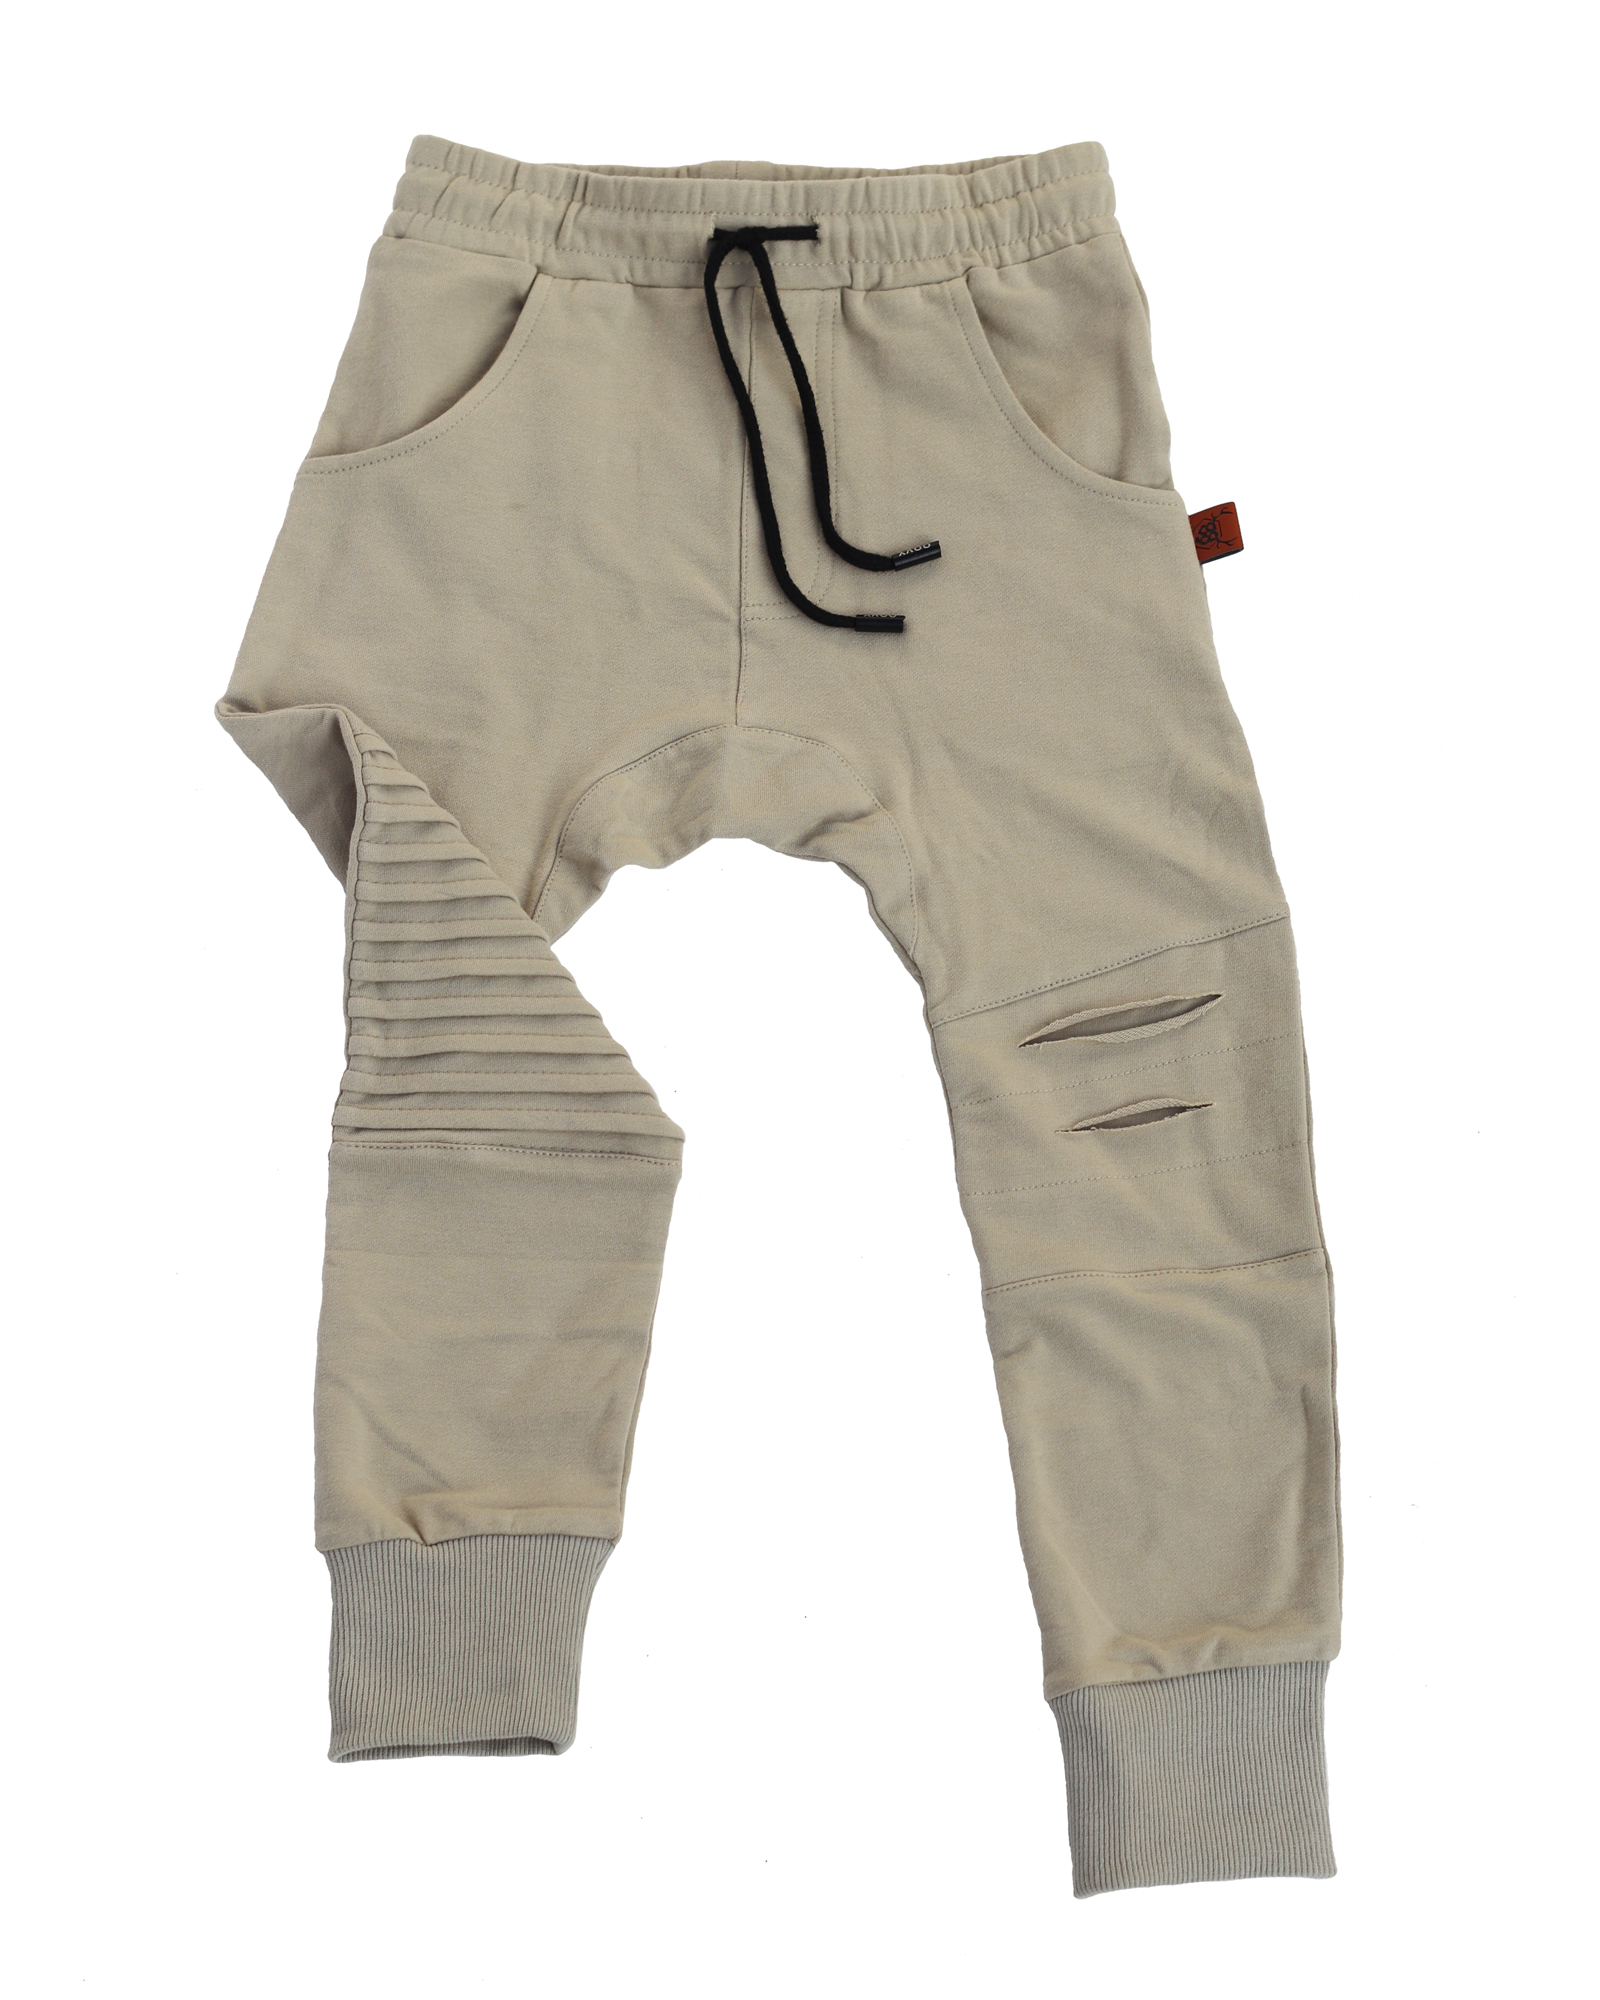 OOVY cool kids pants, joggers & chinos for kids with swag